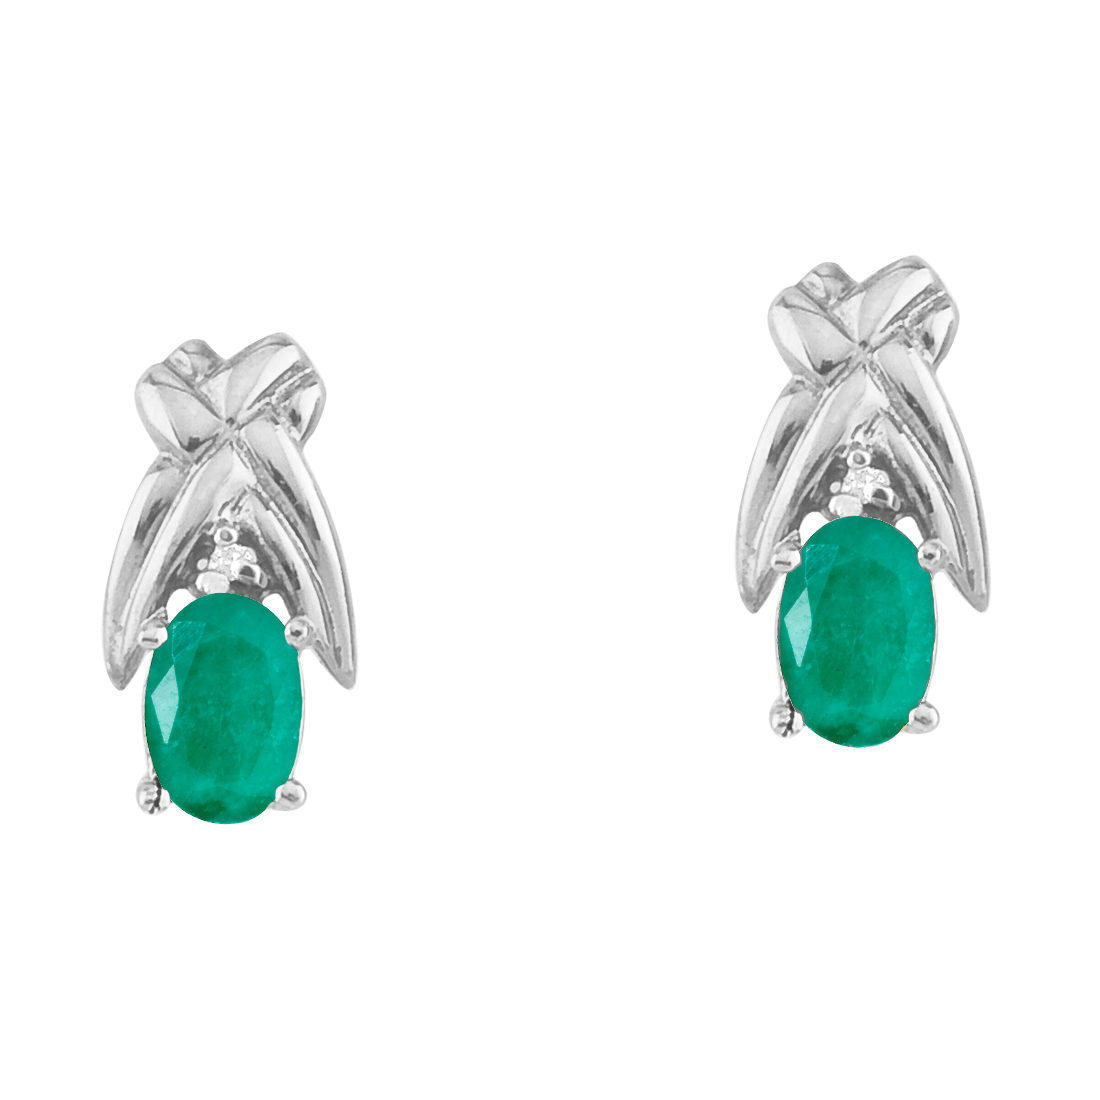 14k yellow gold stud earrings with 6x4 mm pear emeralds and bright diamond accents.